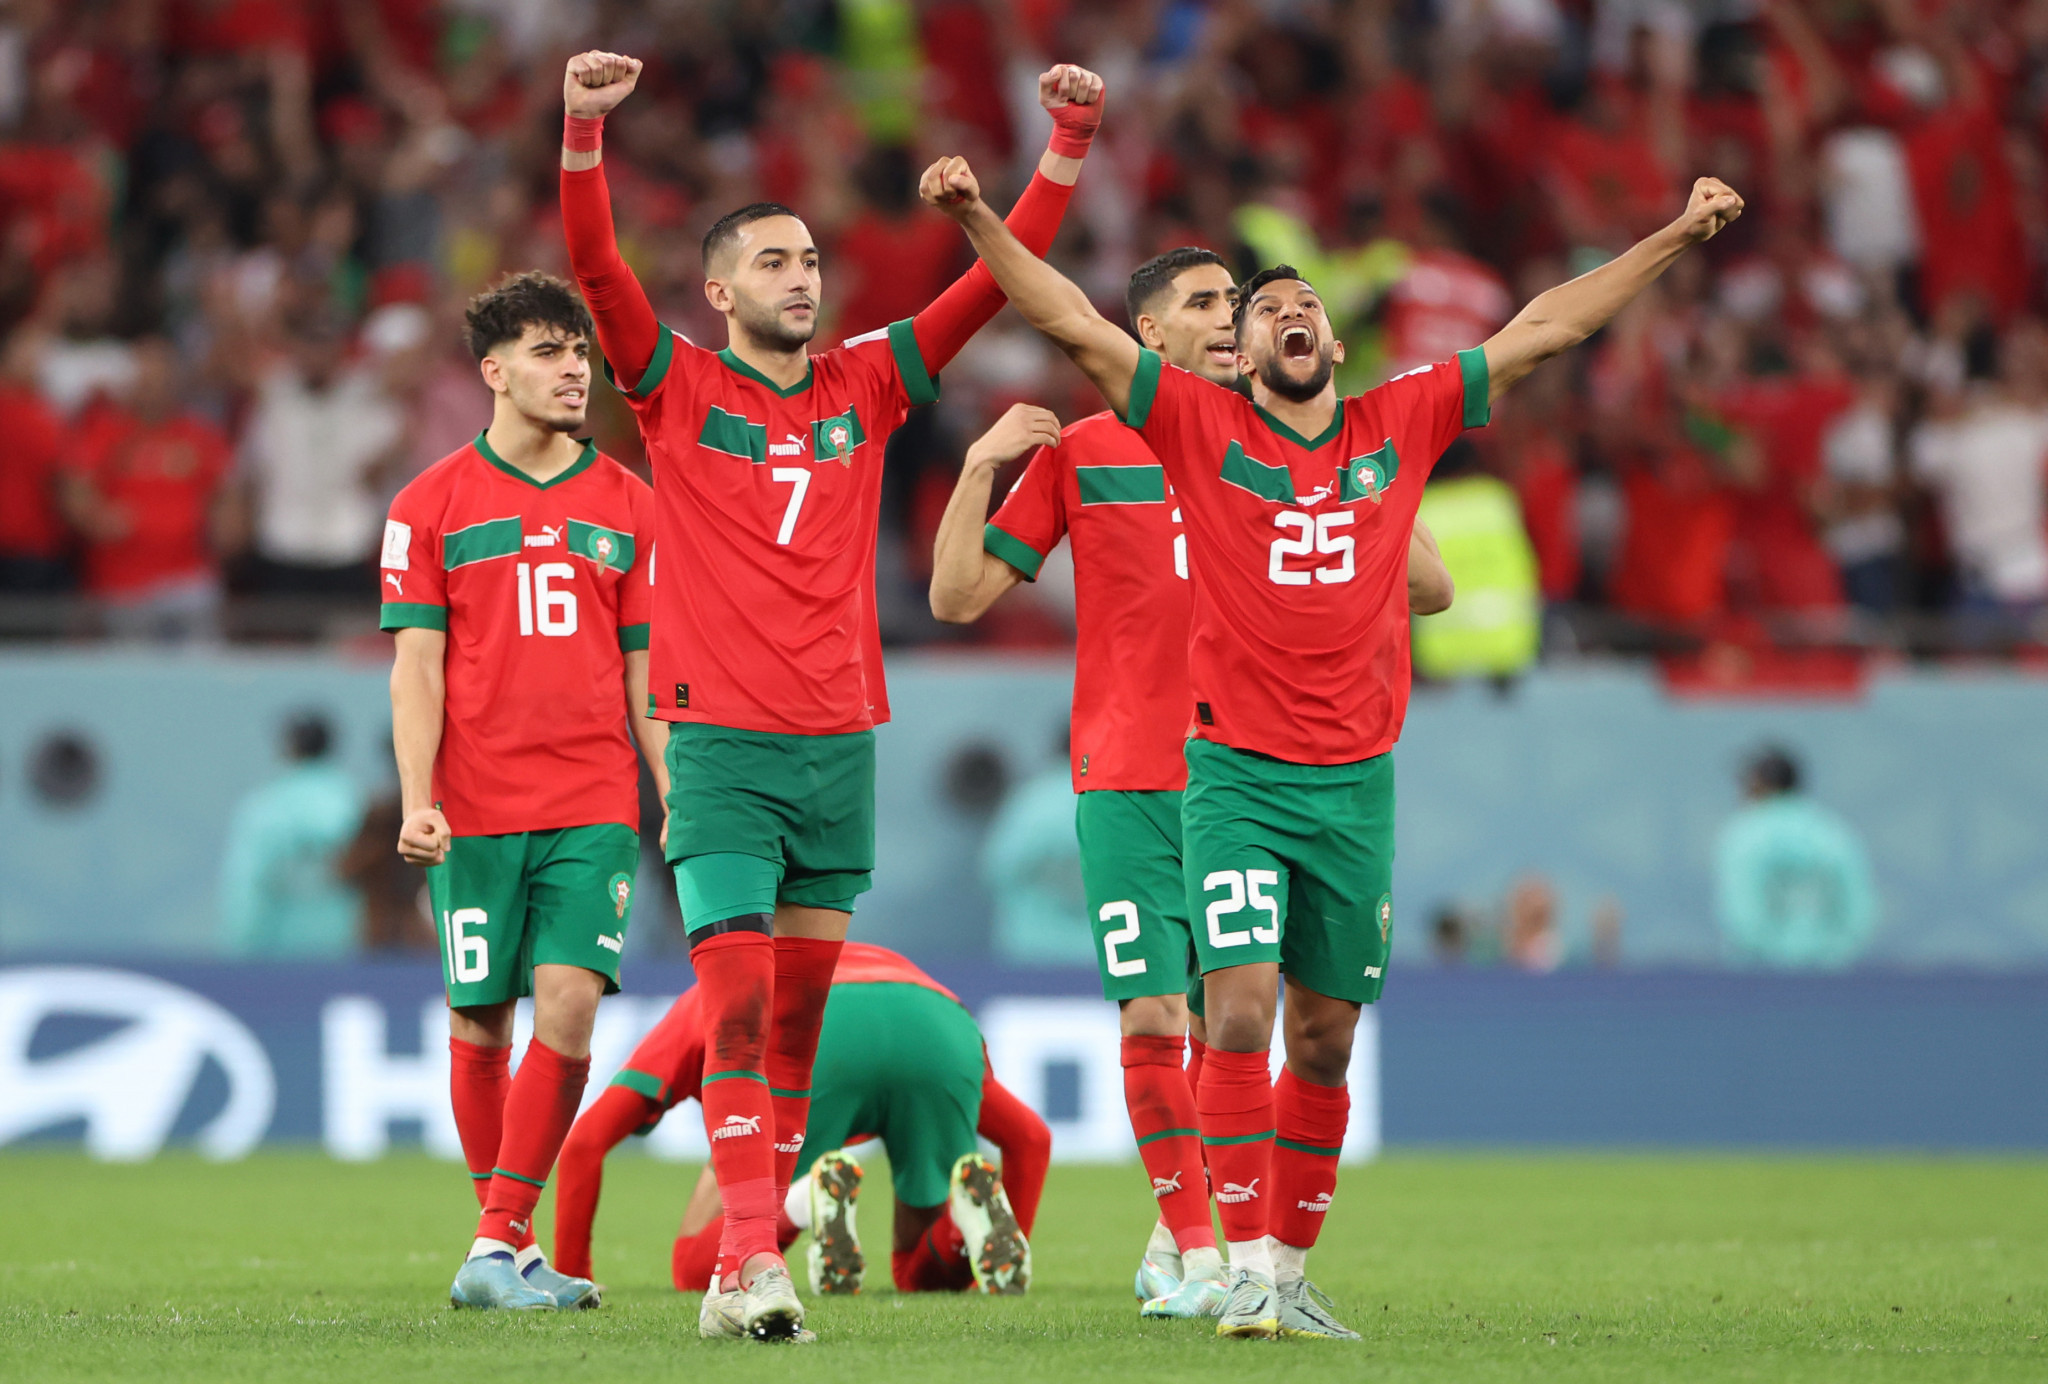 Morocco's historic run to the World Cup semi-finals has helped them to climb up to 11th in the FIFA world rankings ©Getty Images